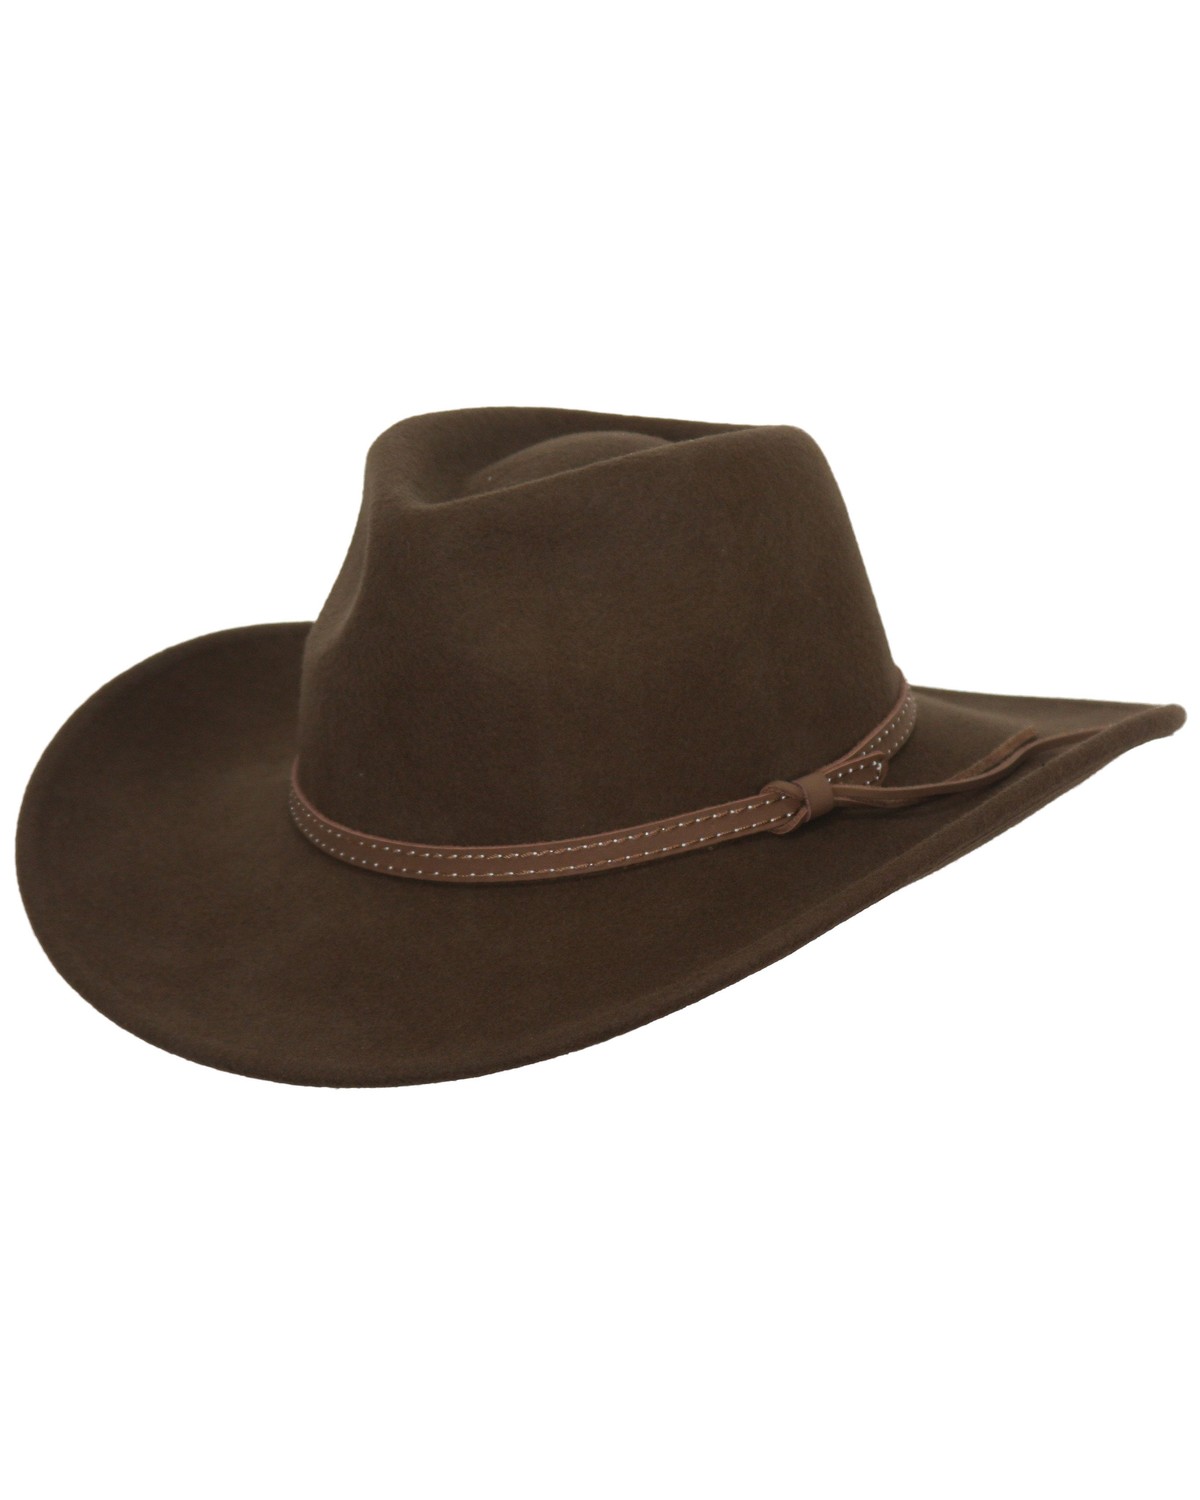 Riverz Hat Outback Style MEDIUM GREAT NEW 